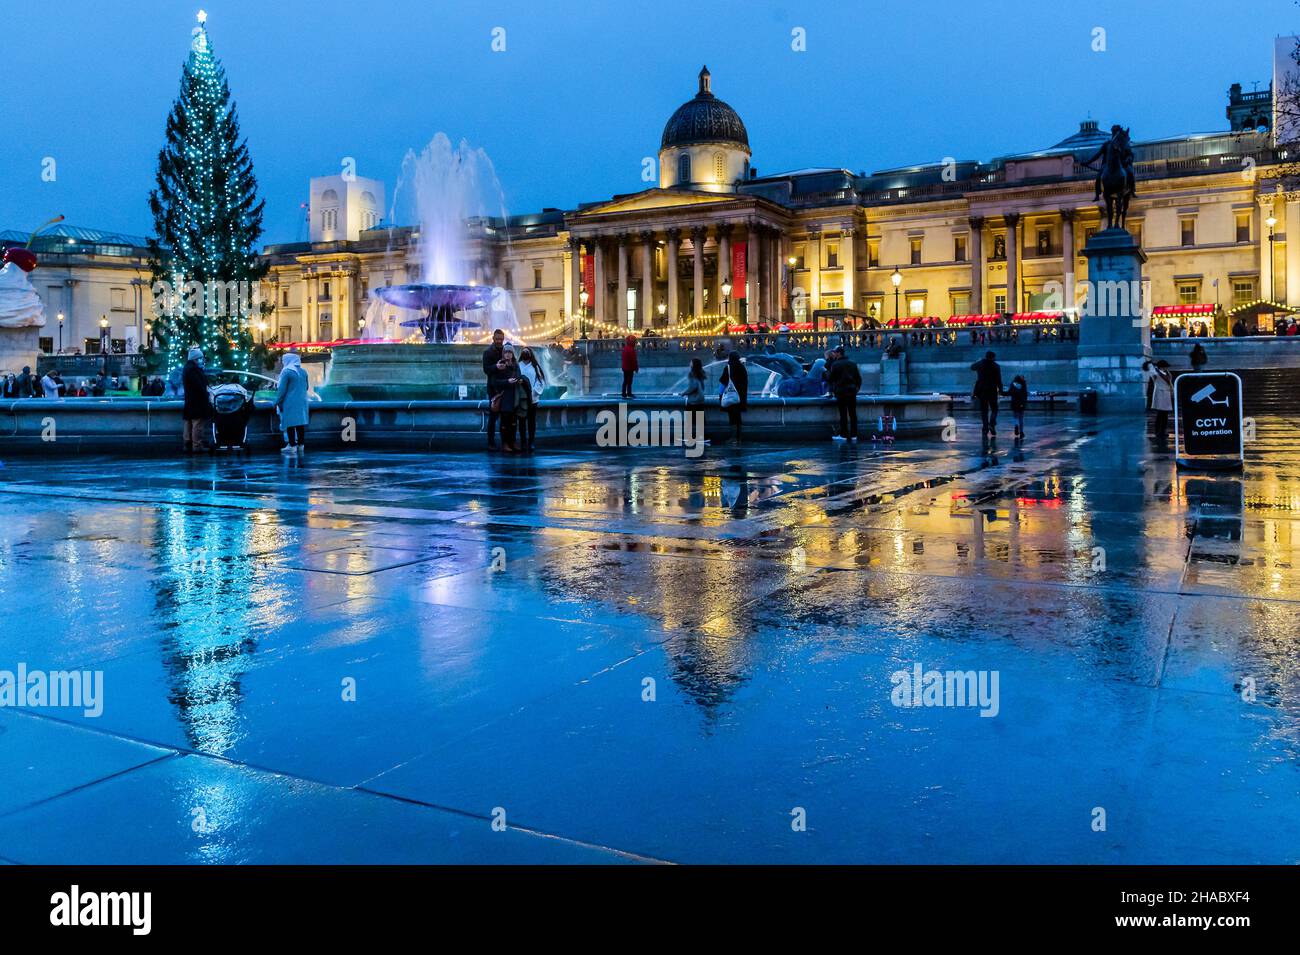 London, UK. 11th Dec, 2021. The Trafalgar square Christmas tree in wet wintry weather. Standing outside the National Gallery both are reflected in the wert stones of the square. Credit: Guy Bell/Alamy Live News Stock Photo